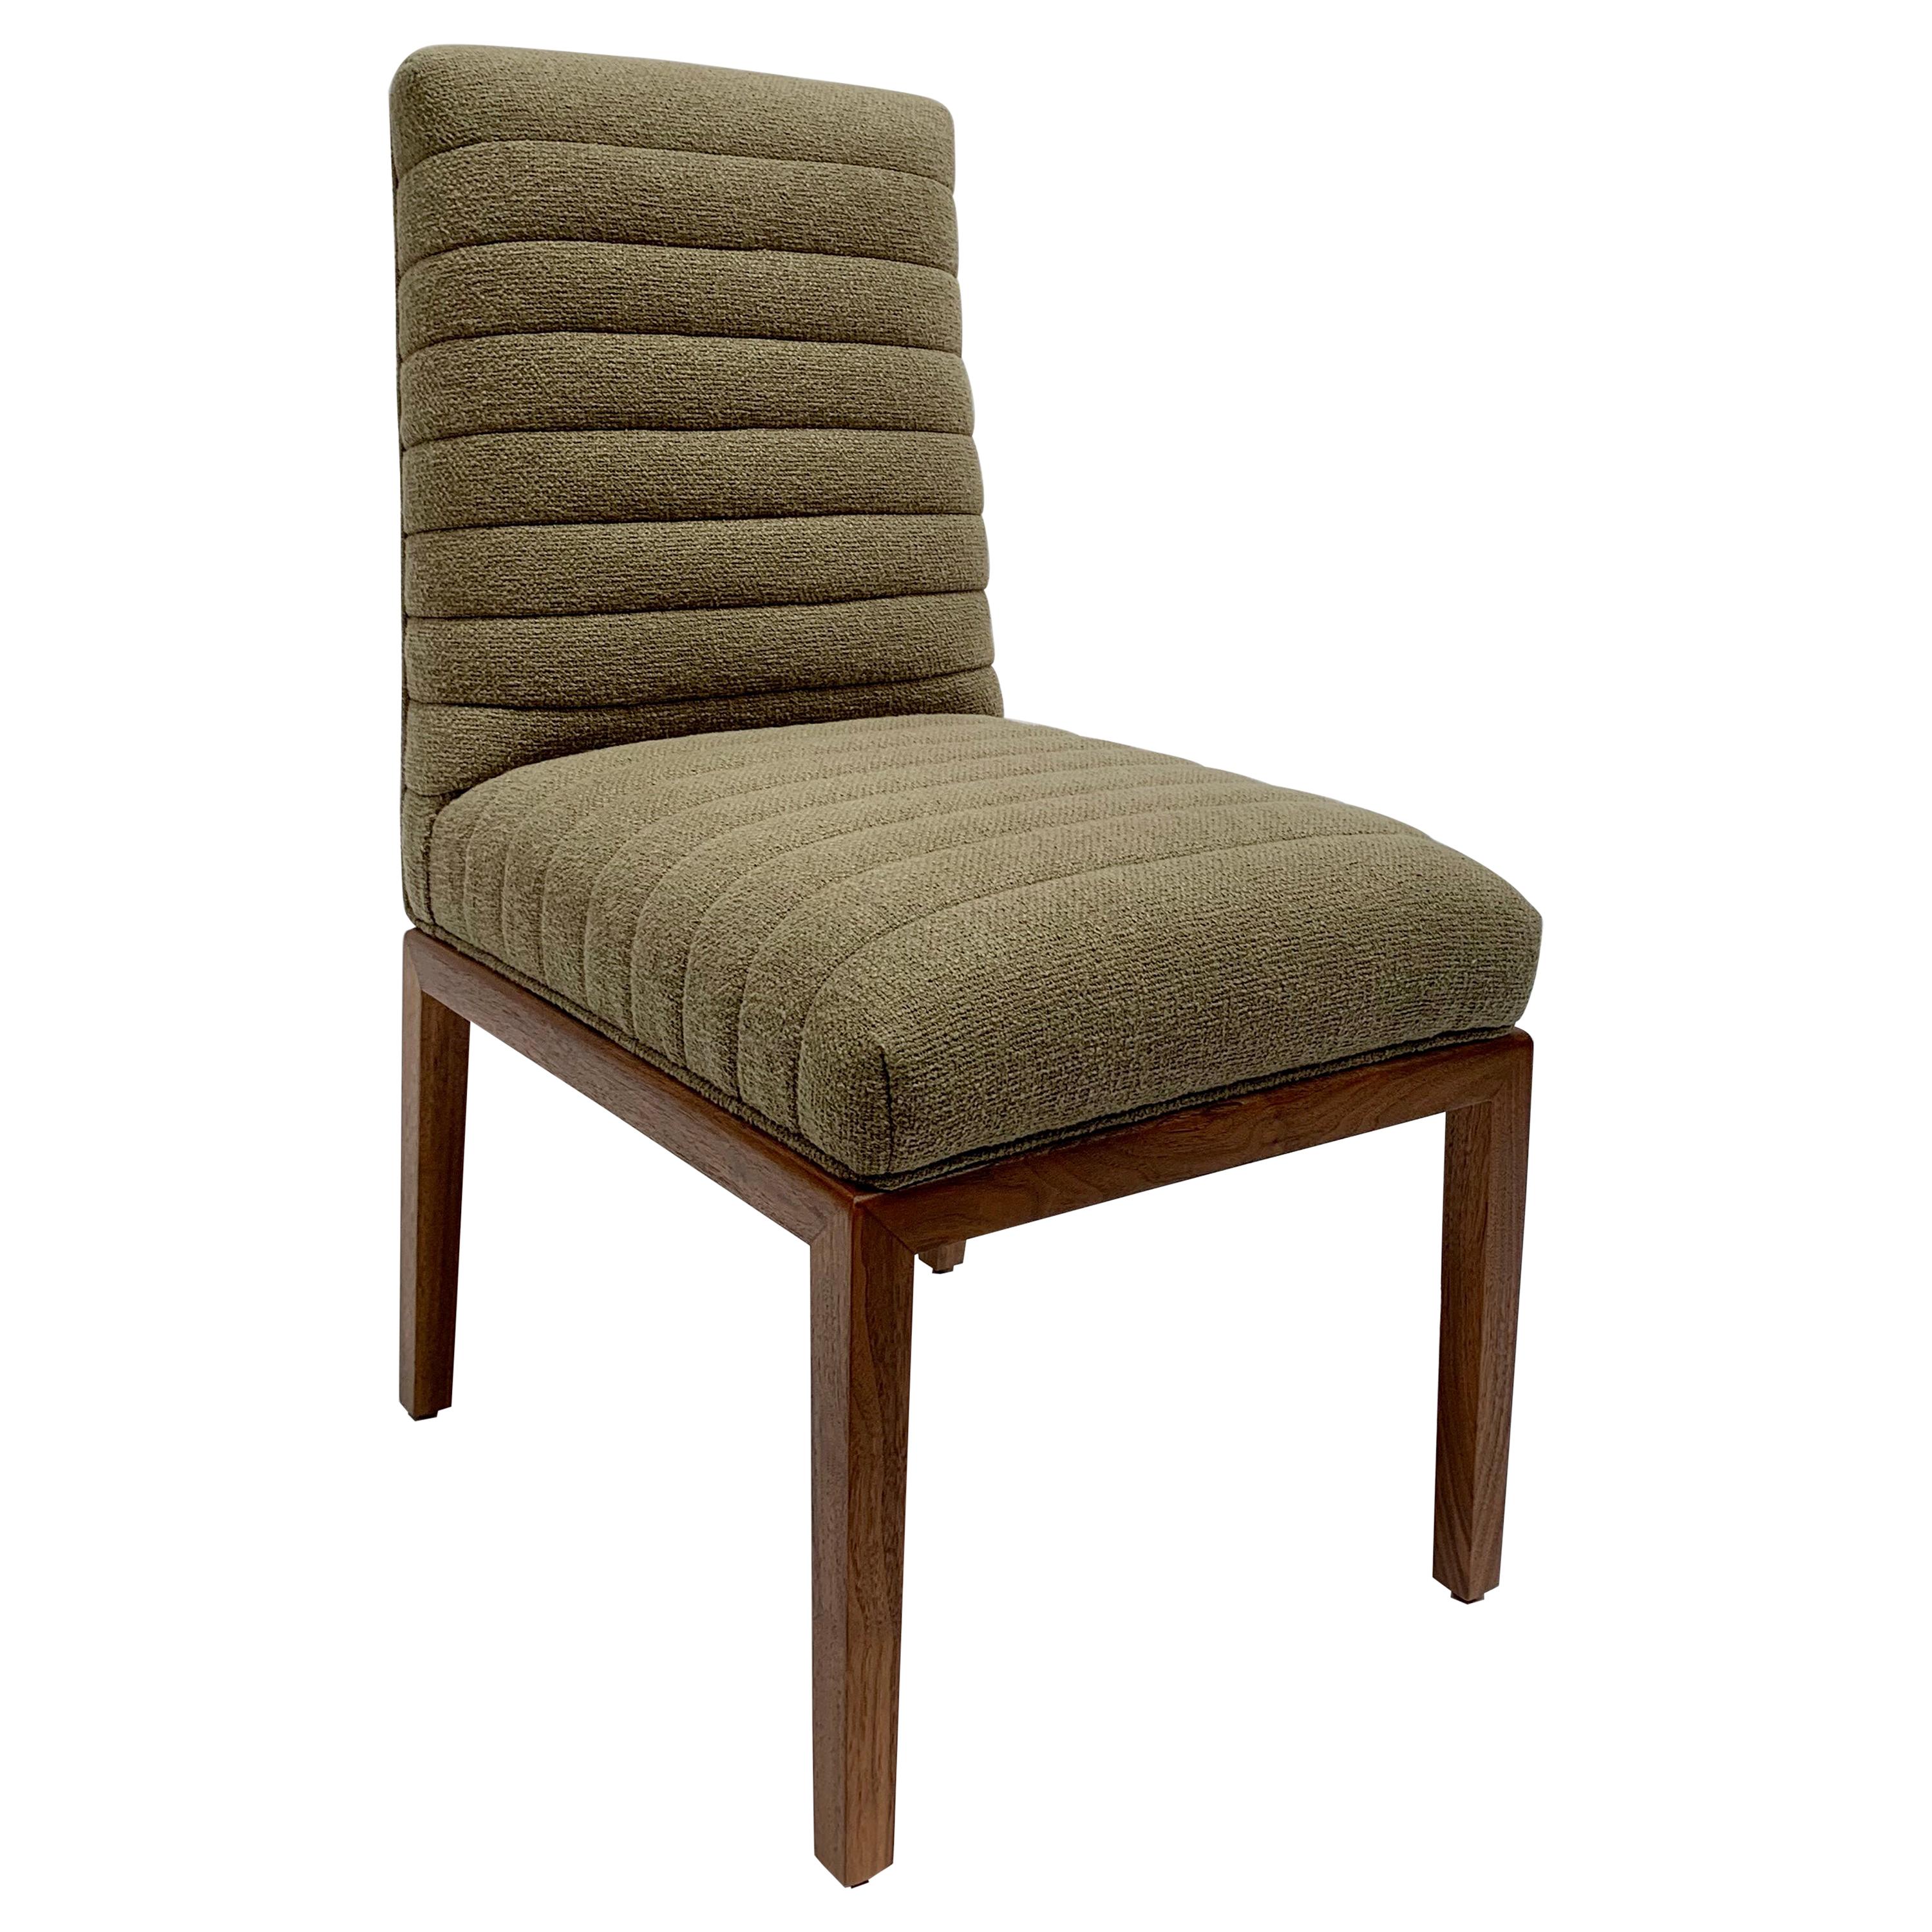 Green Highback Shoreland Chair by Brian Paquette for Lawson-Fenning, In Stock